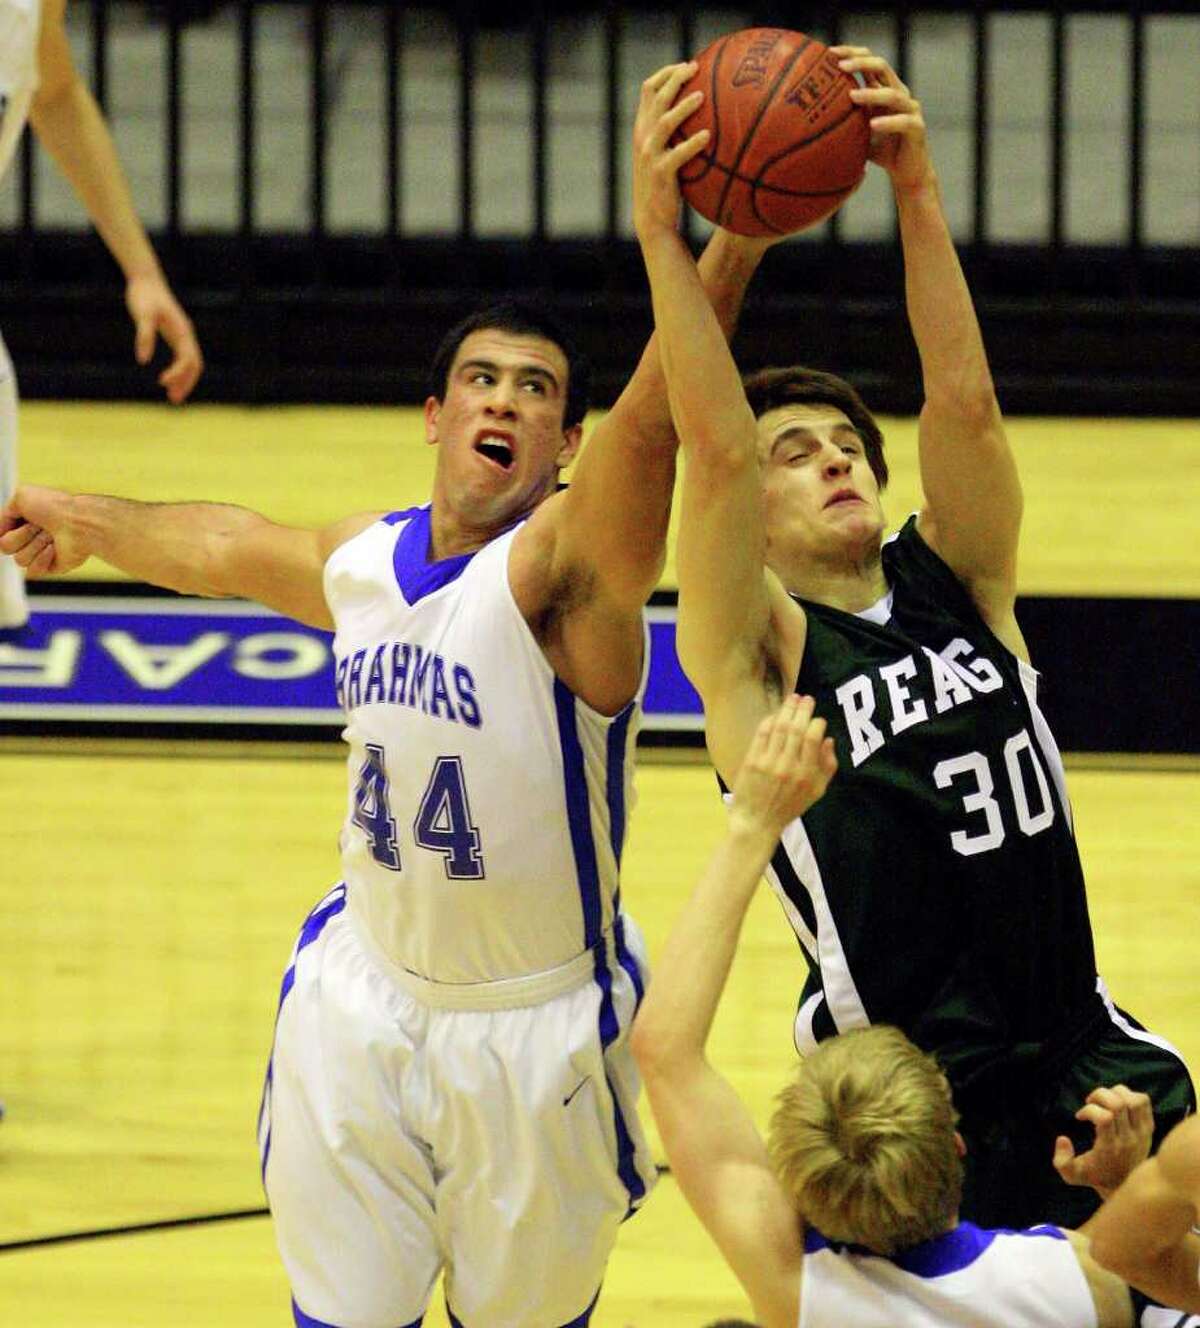 MacArthur's Jace Amaro and Reagan's Brad Coulter grab for a rebound during second half action on Monday, Jan. 10, 2011, at Littleton Gymnasium. Reagan won 61-57.